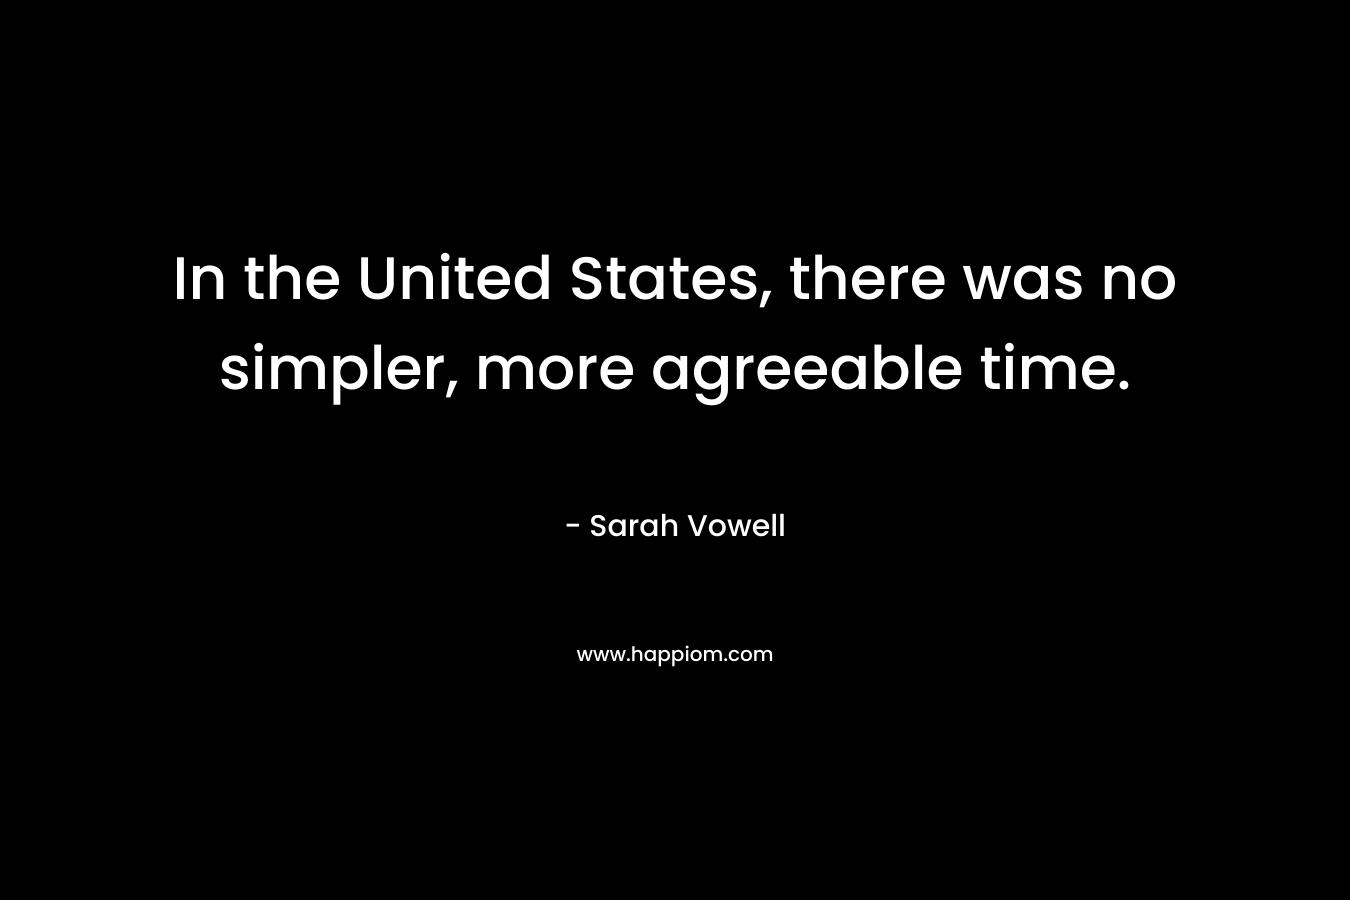 In the United States, there was no simpler, more agreeable time.